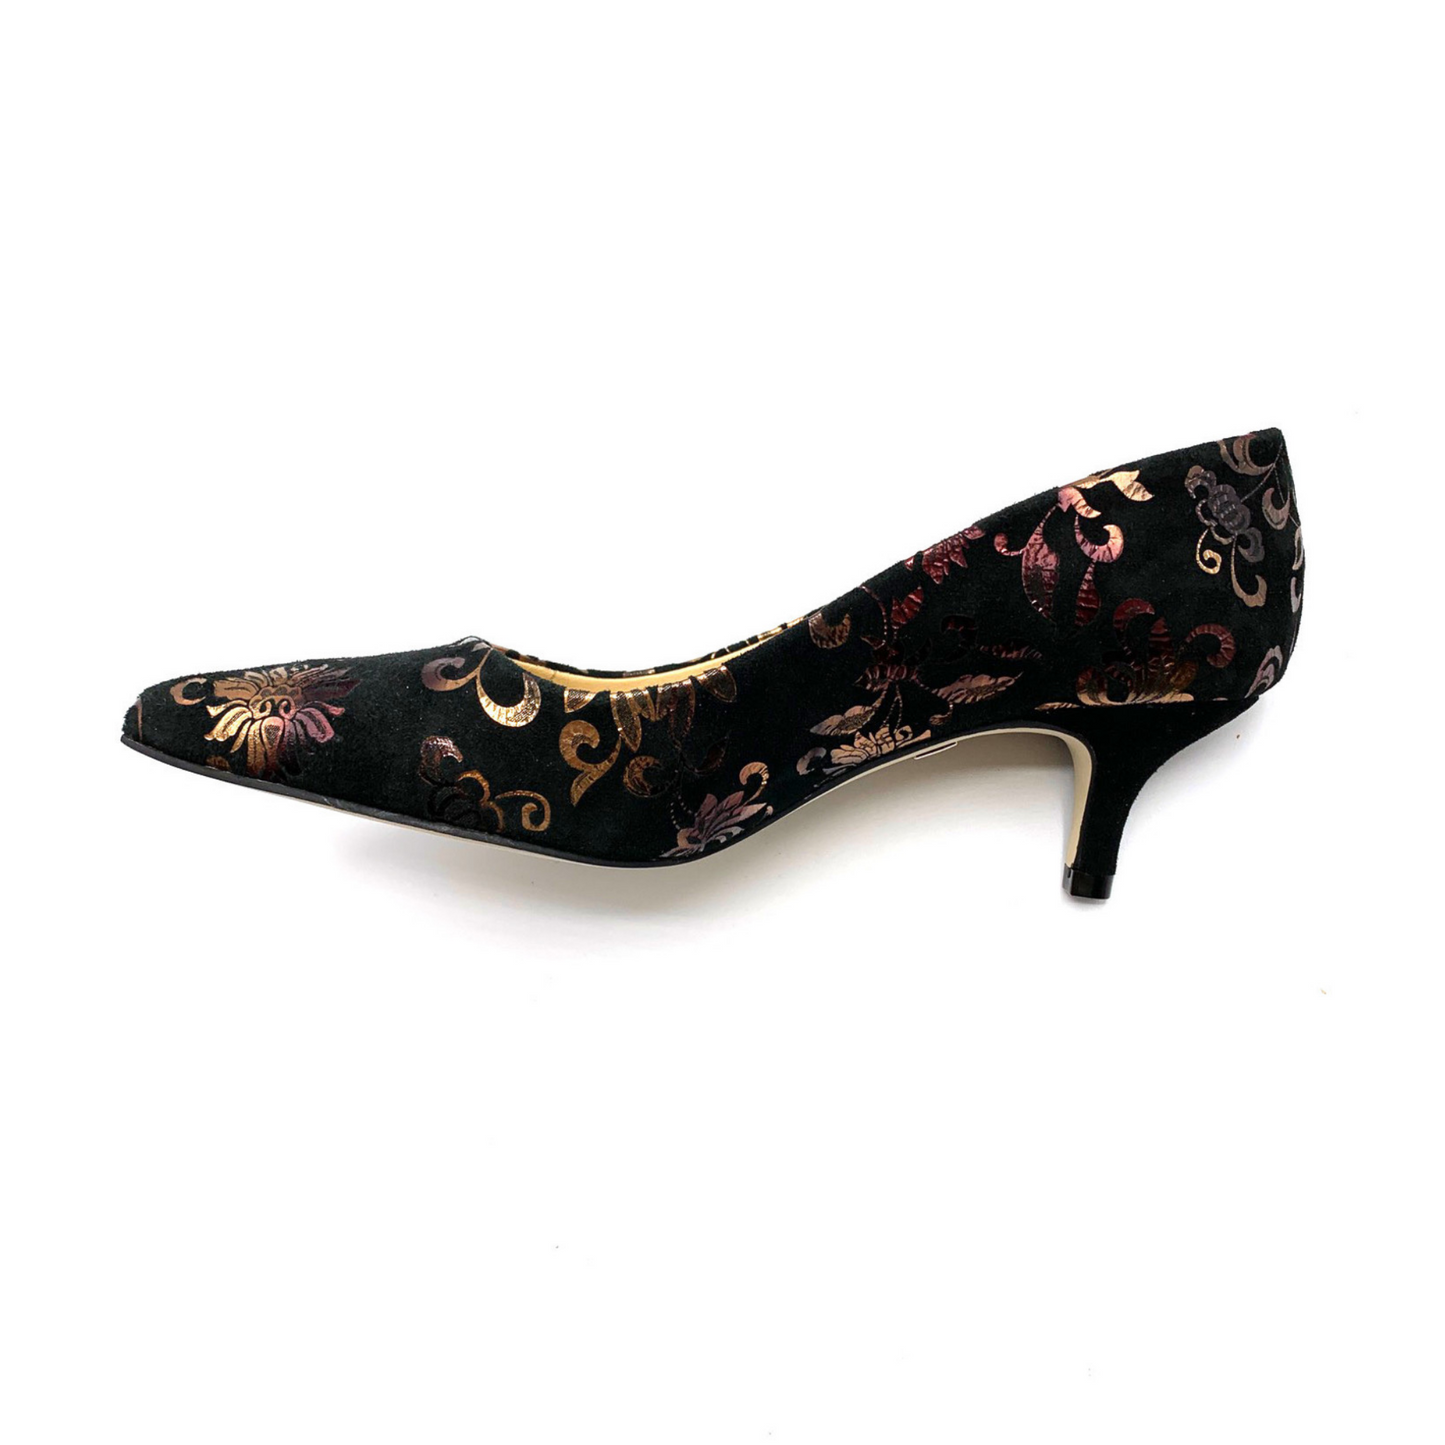 The side view of the shoe, showing the 2 inch kitten heel and the unique flower print.